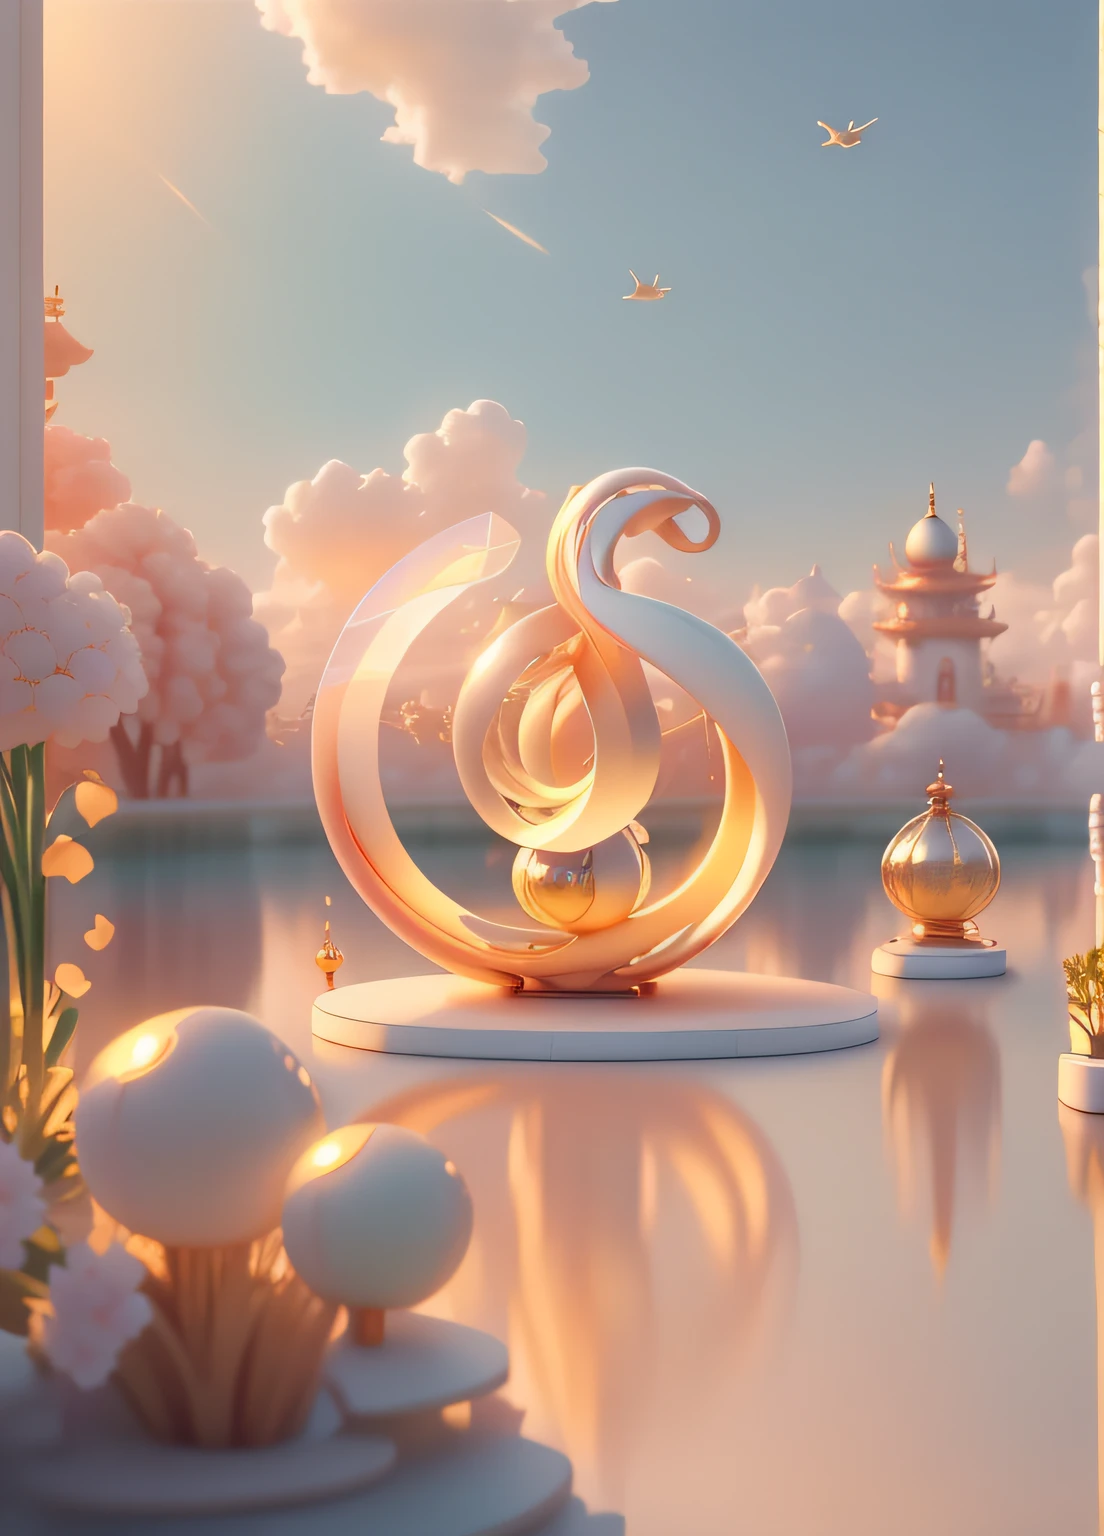 Masterpiece,（(Thousand pure glass,Shine：1.2，（Transparent：1.3),The sheen)),Best quality;（pixar-style：1.4)，（Cloud sea，at sunrise，The kingdom of Zhou was surrounded by clouds of fire，rainbowing，Flying birds，Paper airplanes)(Ultra detailed，Aesthetic，Beautiful composition is rich，vivd colour，volumetric soft light)4K，Reflections in sunlight，Reflections is inspired by Alice in Wonderland，magic，Fairy tales，illusory engine，rendering by octane，cuteness render，a 3D render，Adobe Photoshop，Awesome beauty